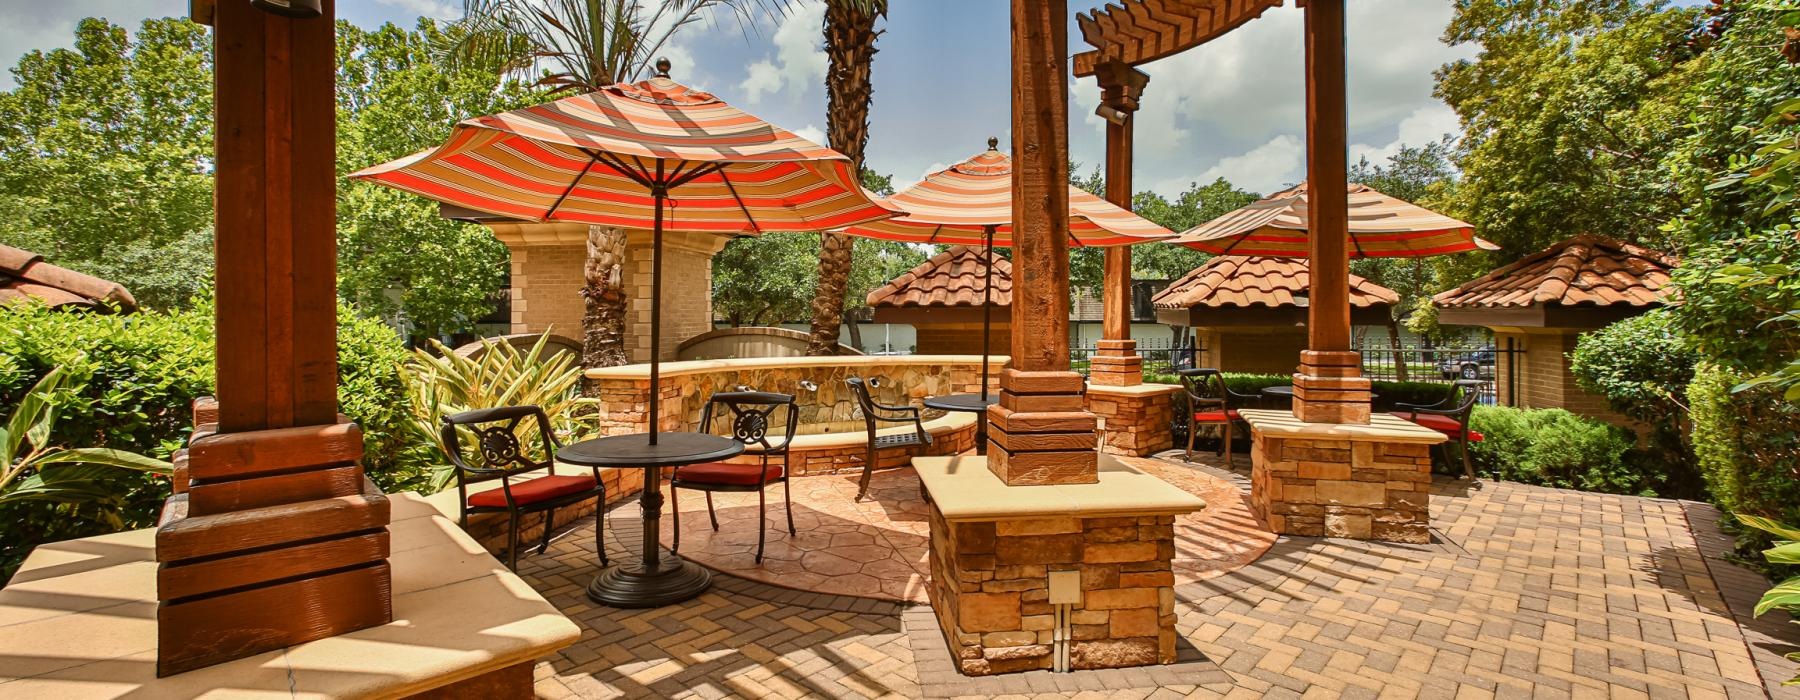 a patio with umbrellas and chairs